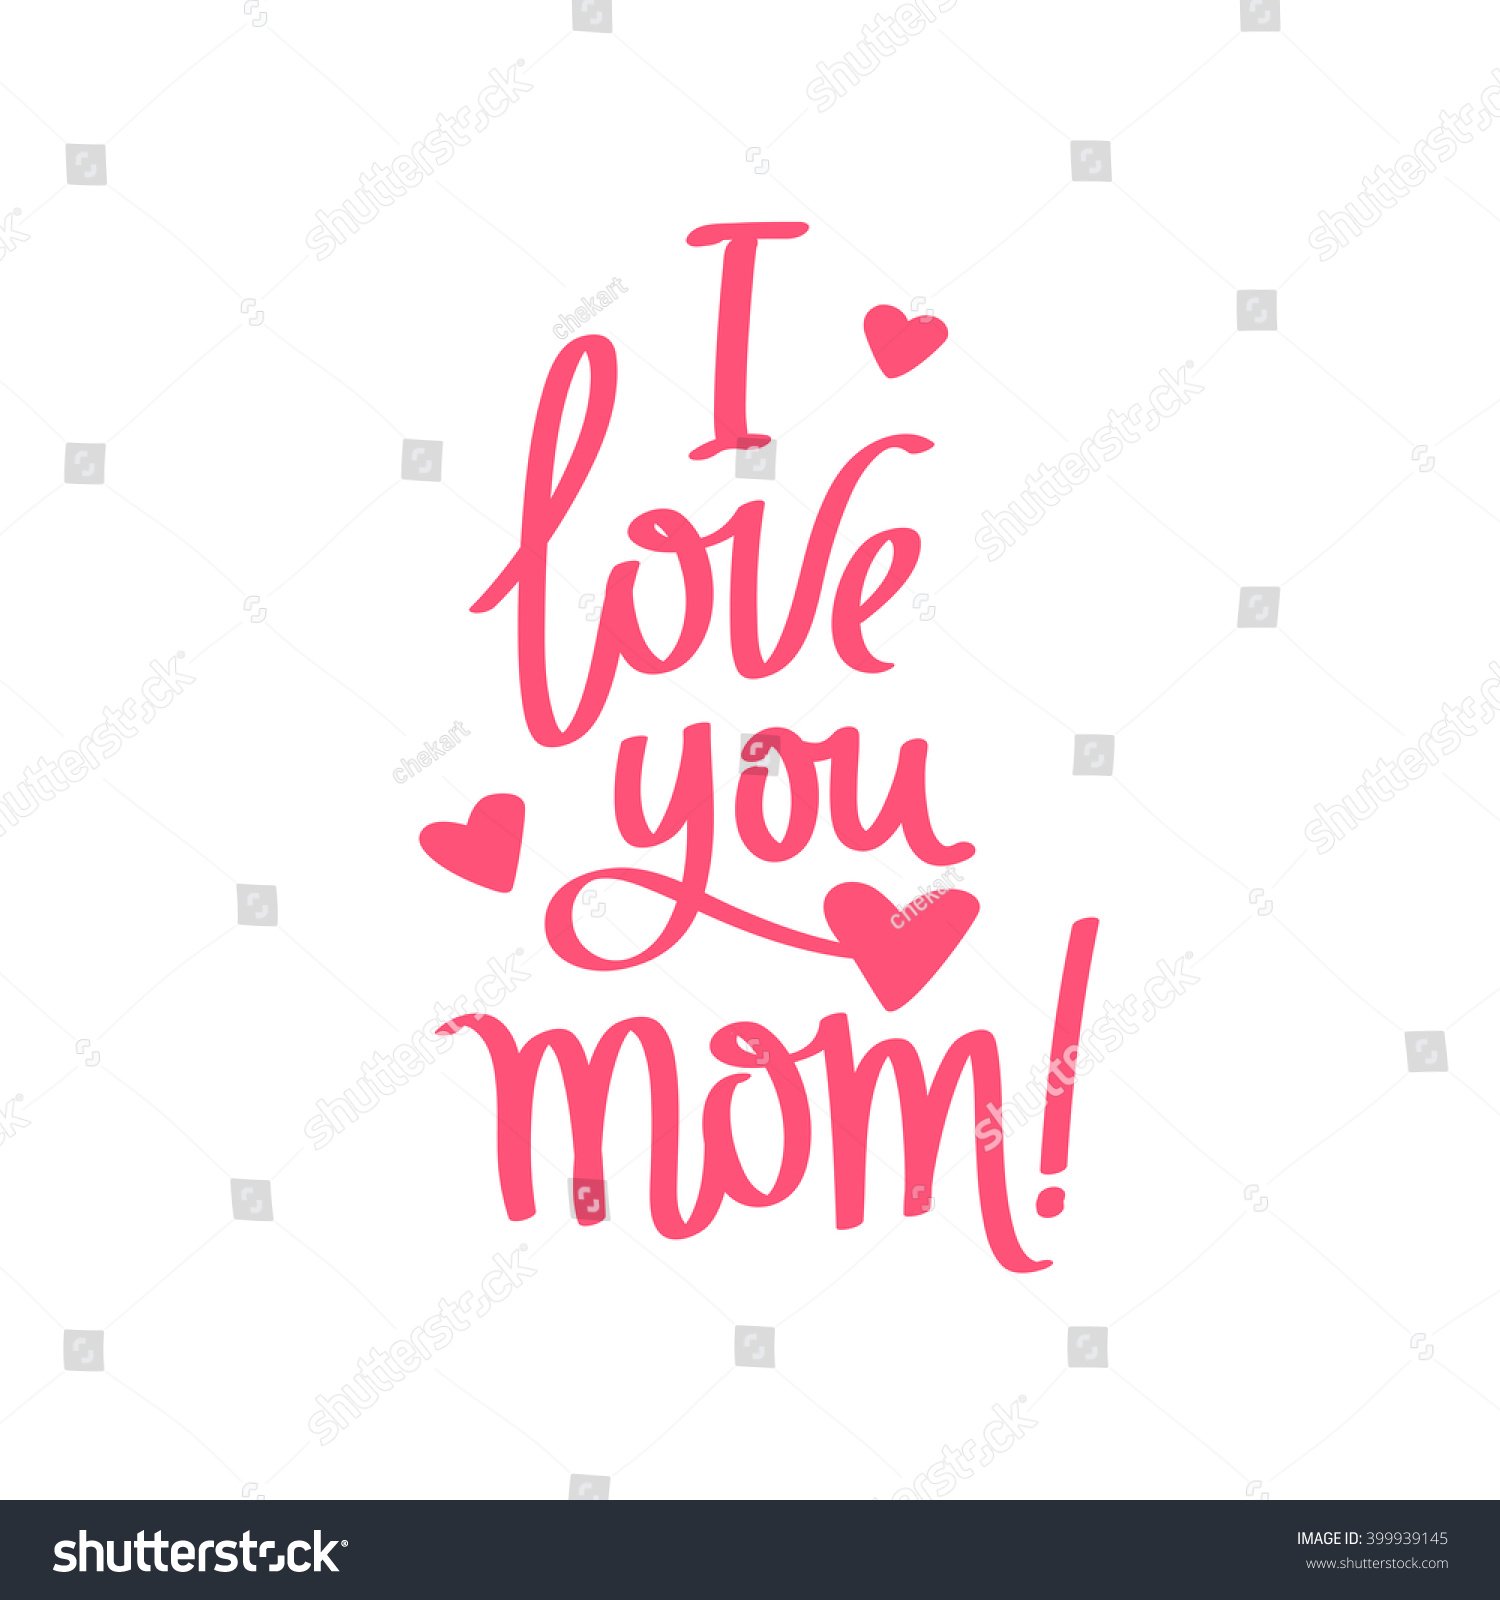 Quote I Love You Mom Fashionable calligraphy Excellent t card for Mother s Day